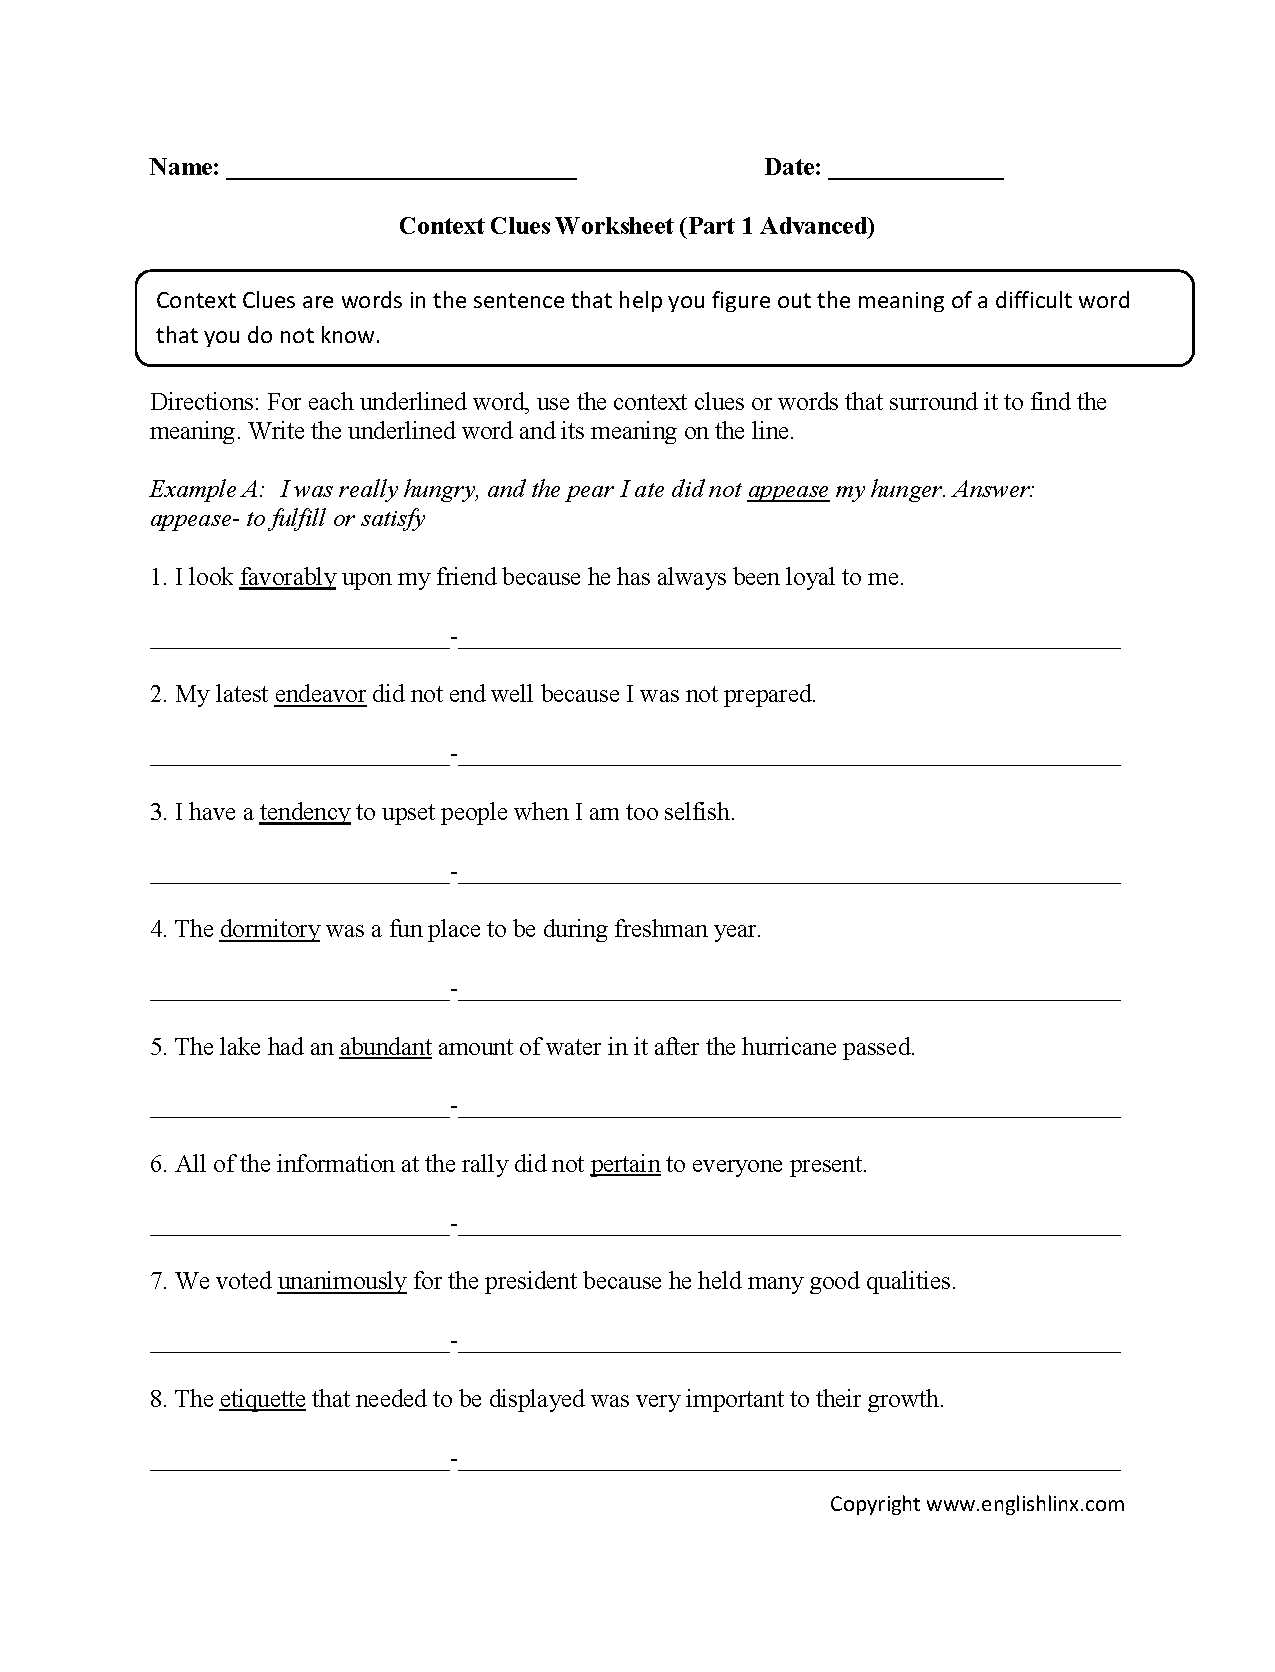 Adverb Practice Worksheets with Context Clues Worksheets Advanced Part 1 Tutoring